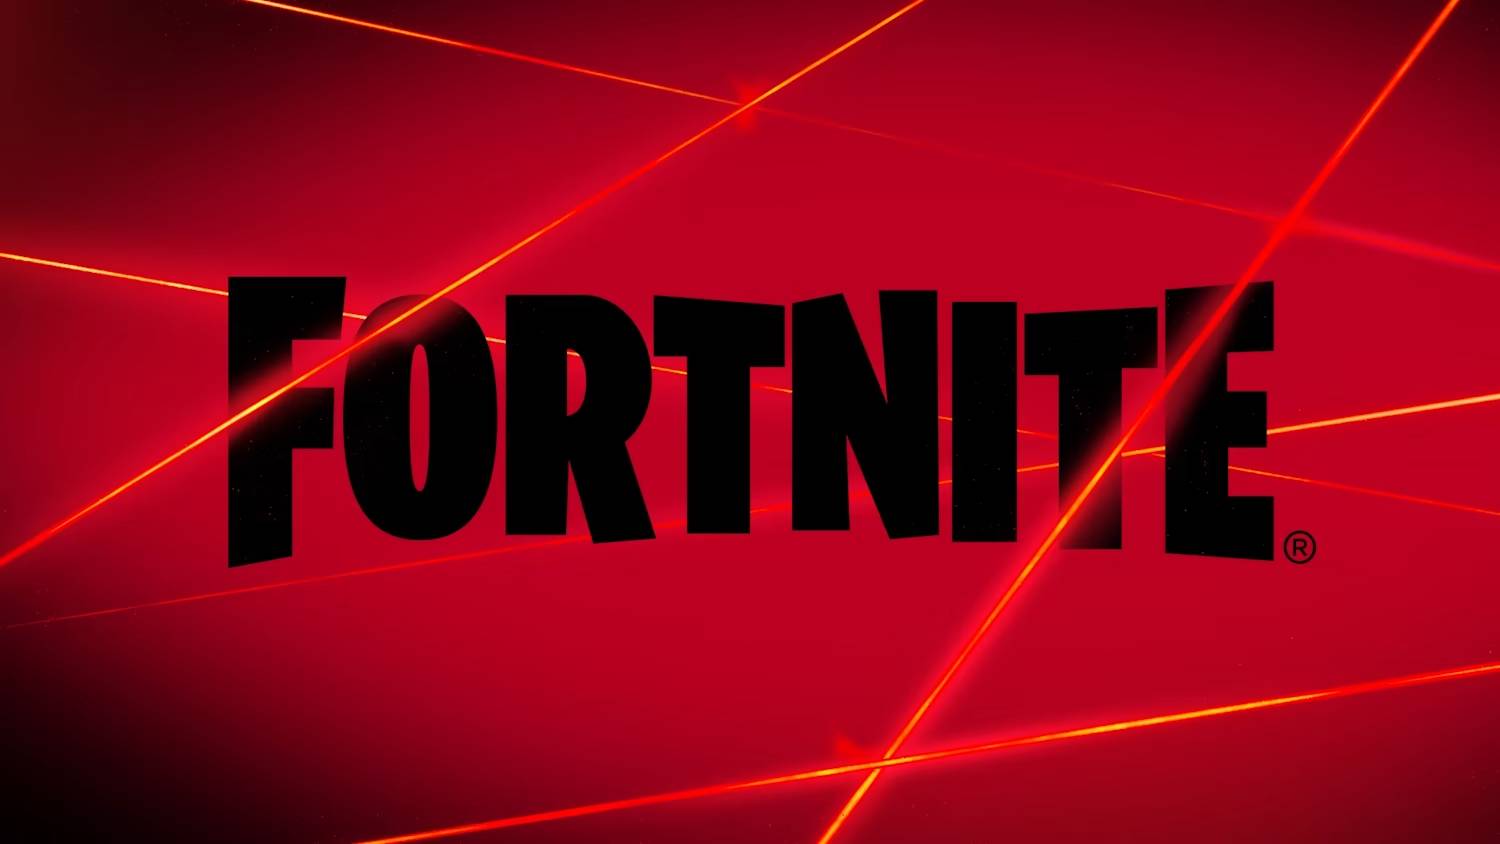 Black Fortnite logo on a red background overlaid with lasers as part of a “heist” theme for Chapter 4 Season 4